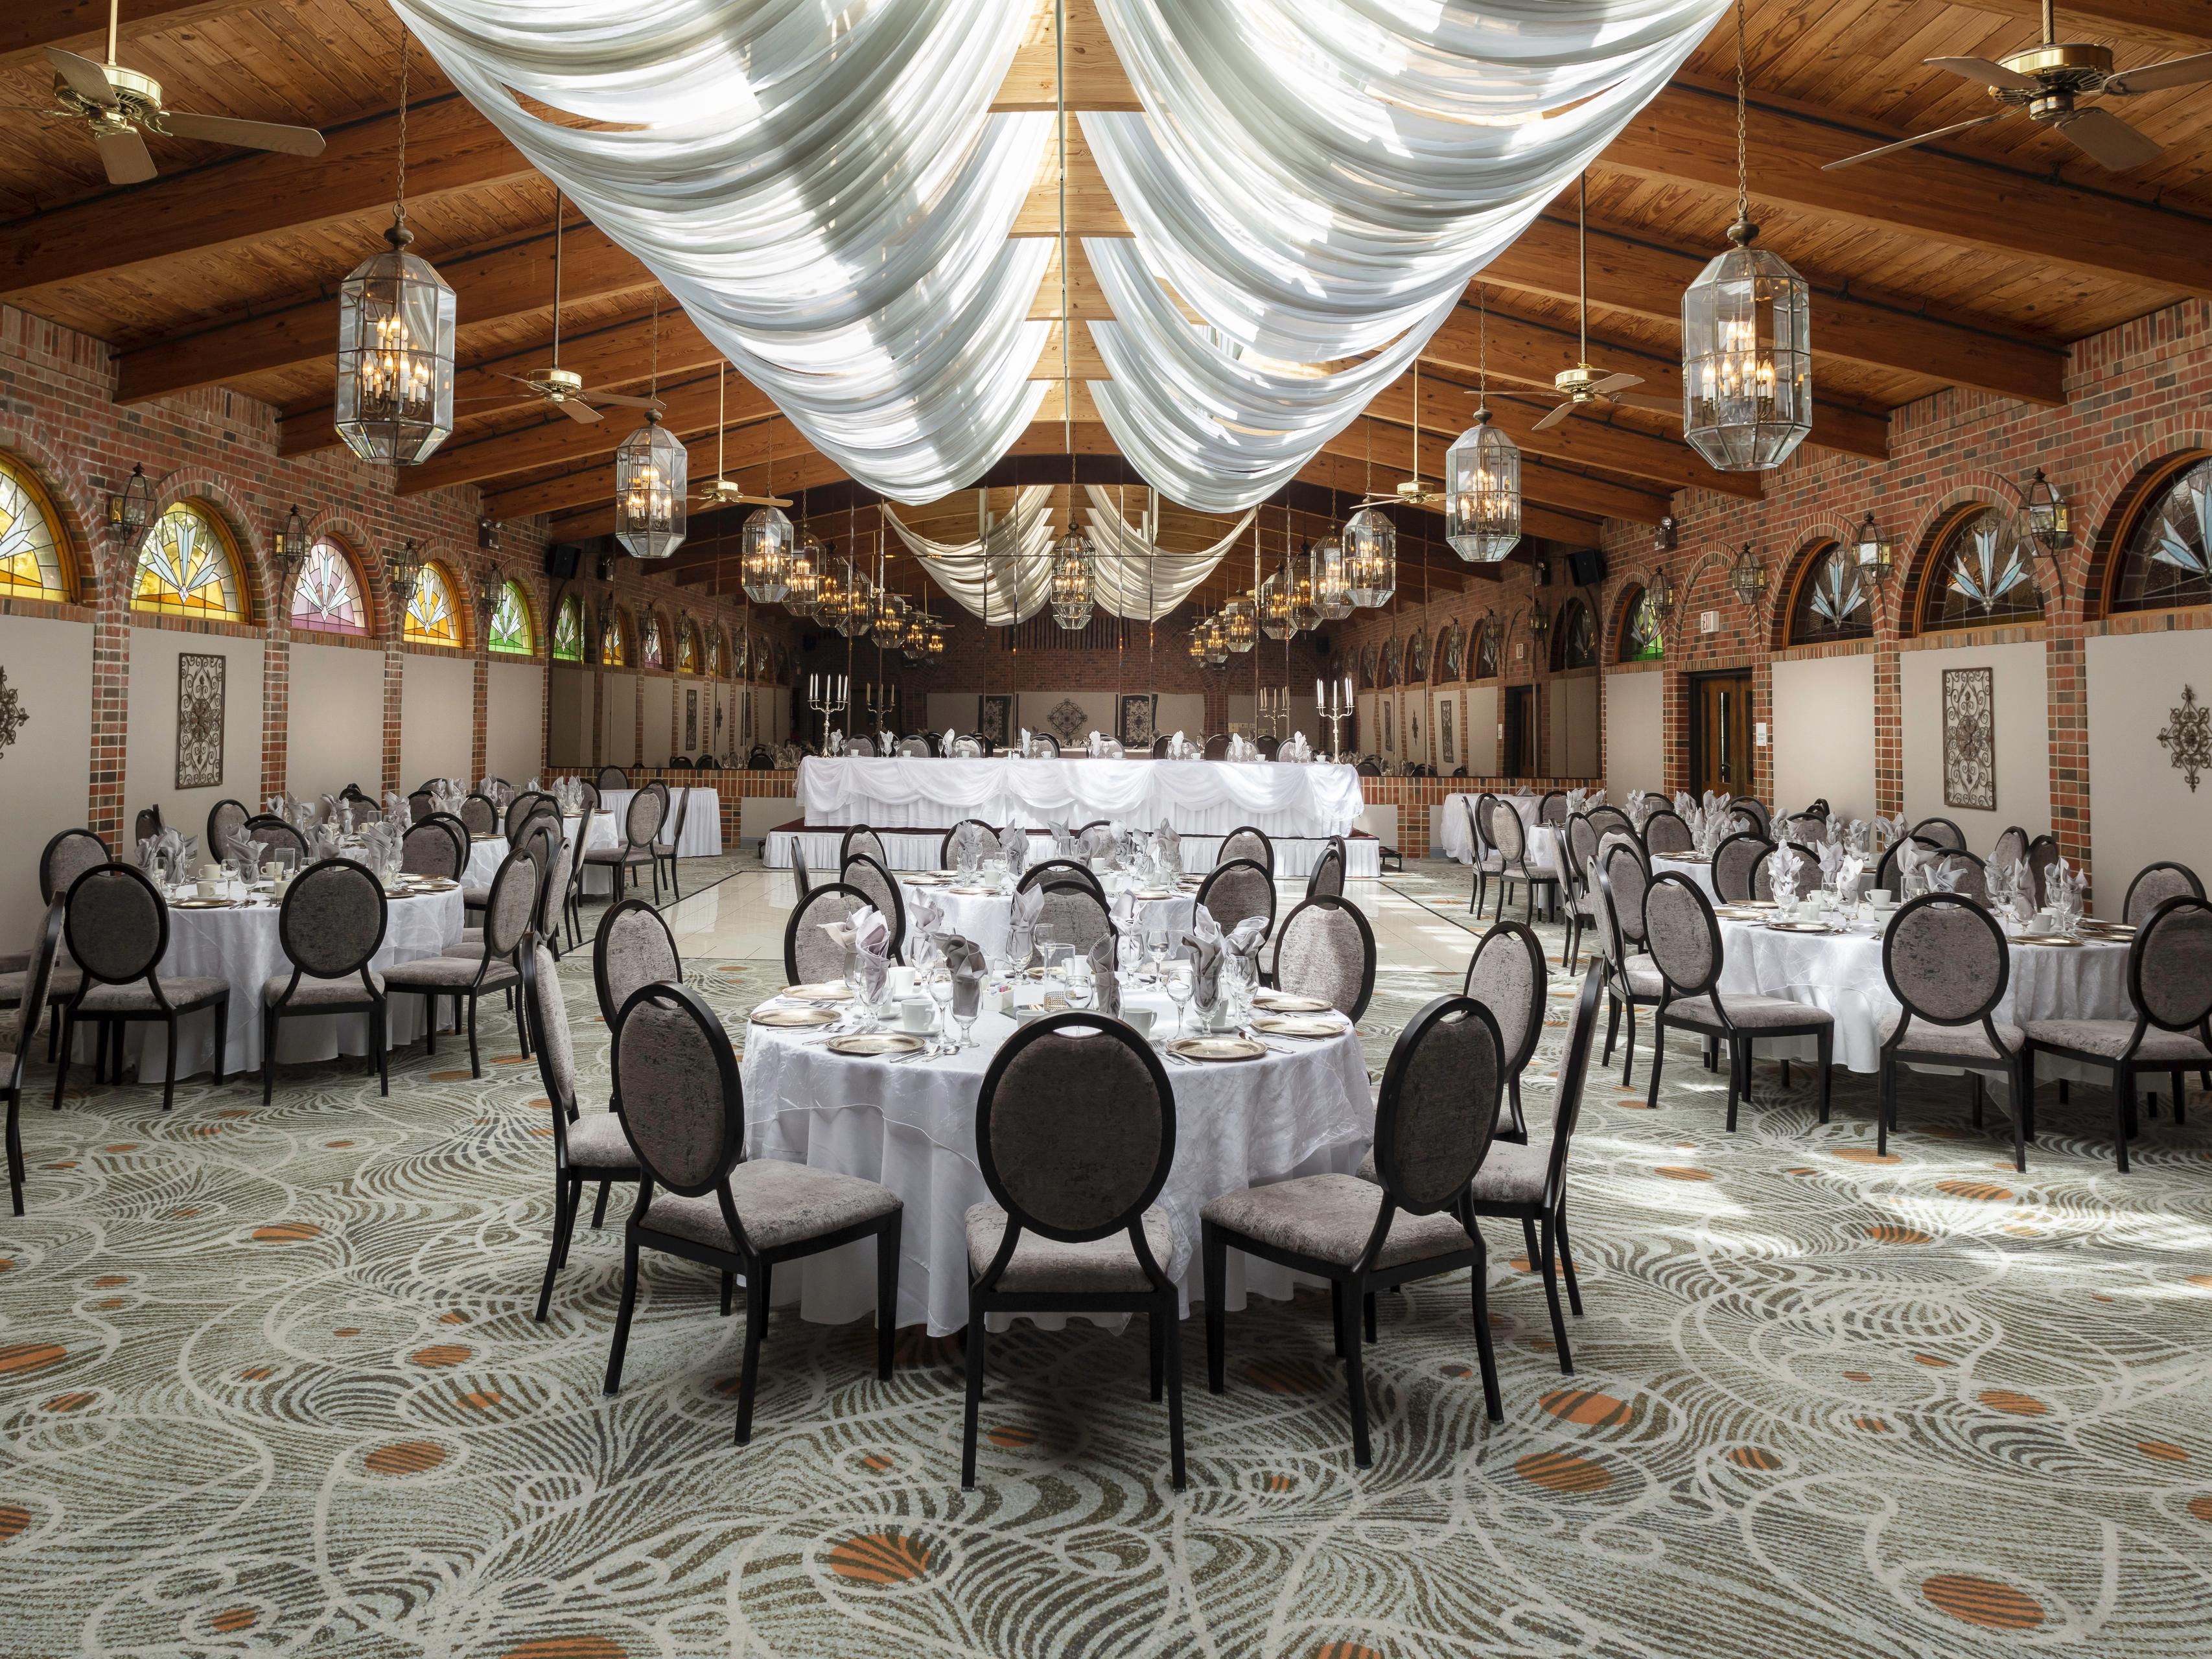 From small intimate gatherings to large family affairs, our elegantly remodeled banquet rooms are tailored to fit your special event! The one-of-a-kind Atrium Ballroom may comfortably accommodate up to 330 wedding guests and offers a charming, rustic ambiance along with a beautiful fireplace, outdoor patio, vaulted ceiling, and natural lighting!